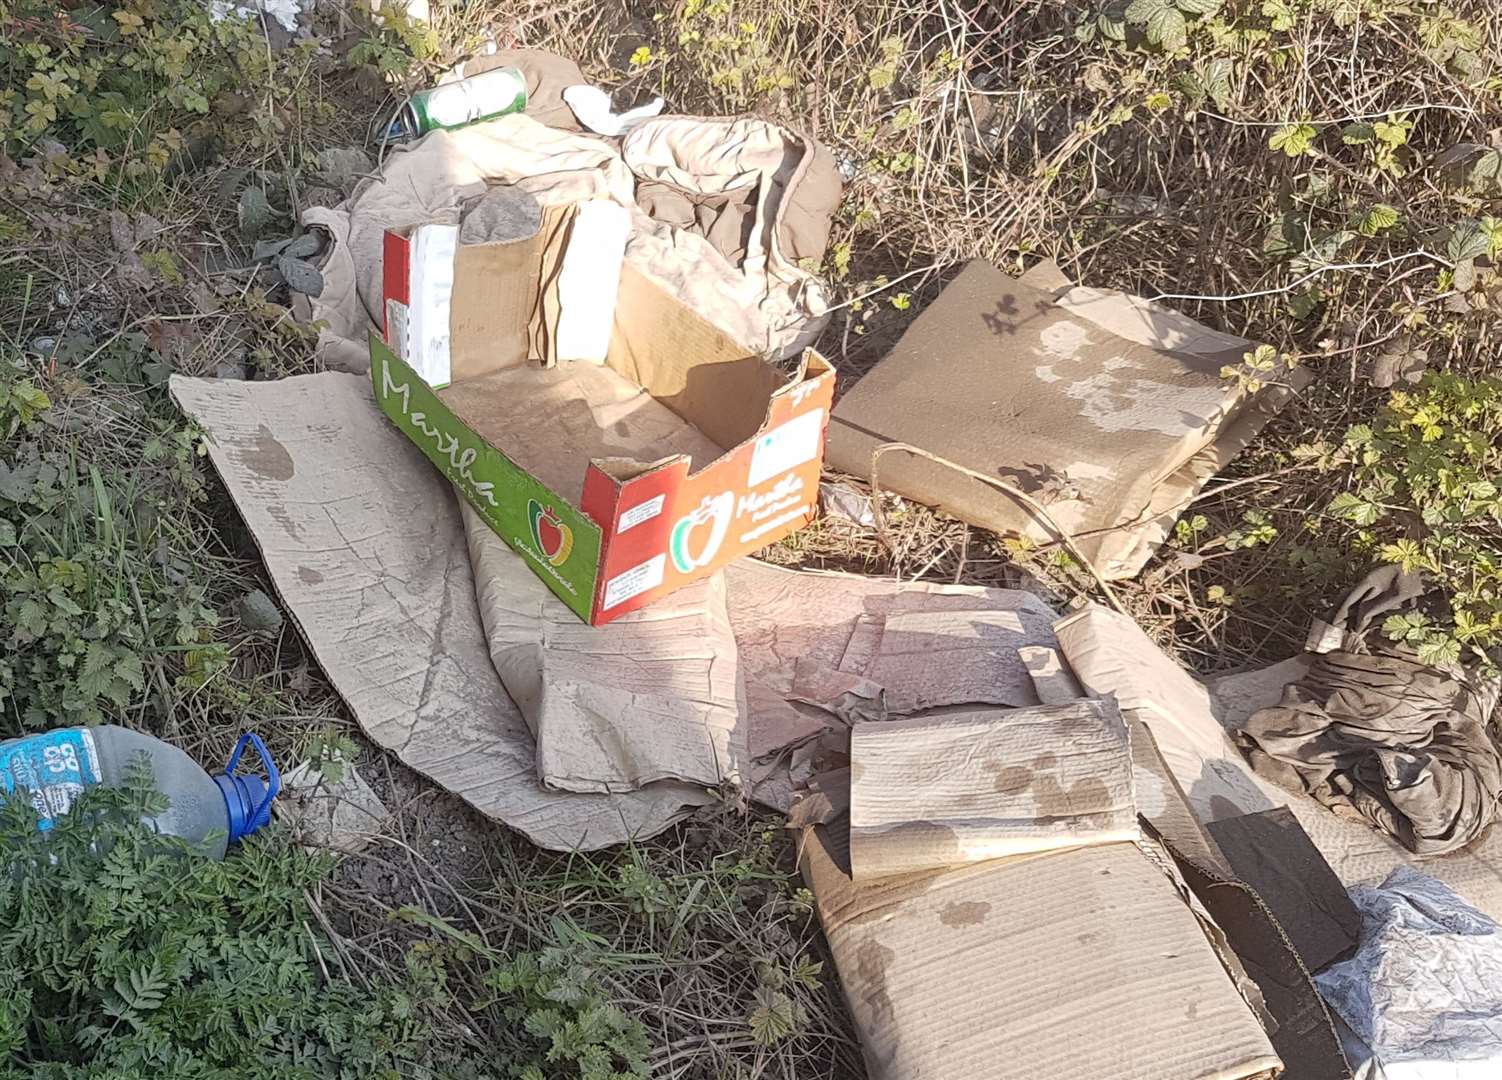 Heaps of rubbish have been abandoned by drivers